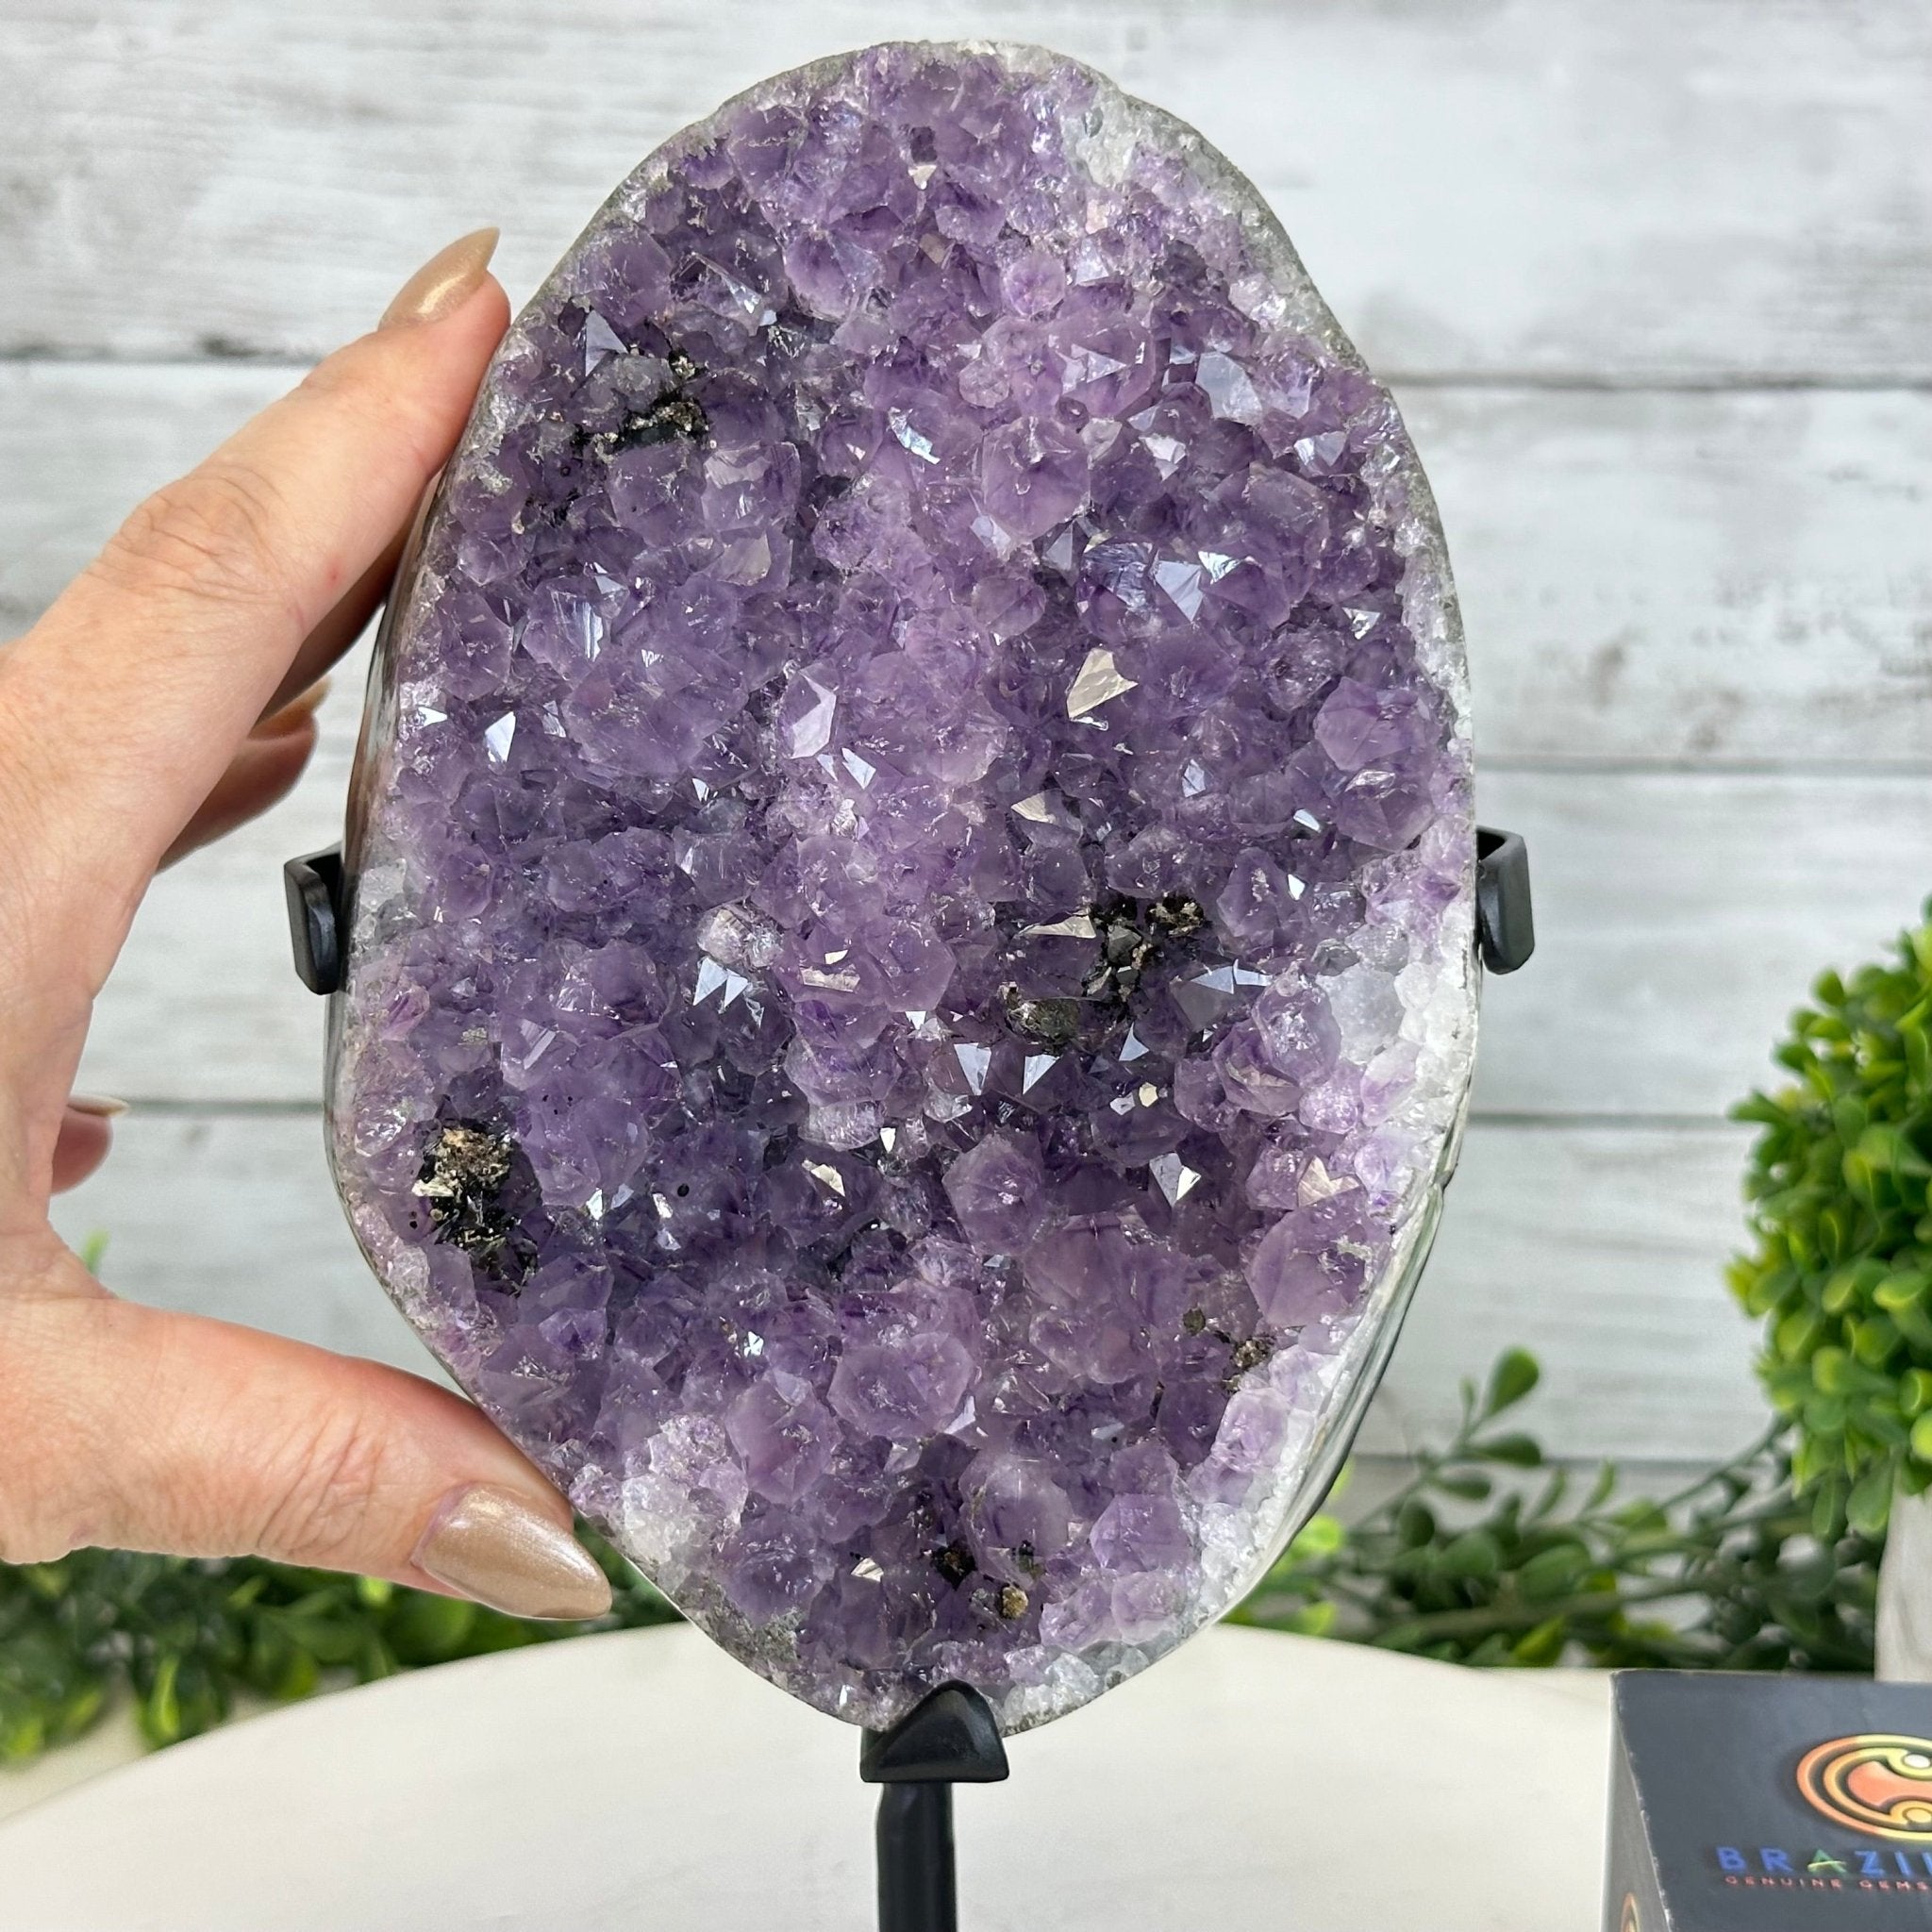 Quality Amethyst Cluster on a Metal Base, 8.5 lbs & 10.5" Tall #5491 - 0050 - Brazil GemsBrazil GemsQuality Amethyst Cluster on a Metal Base, 8.5 lbs & 10.5" Tall #5491 - 0050Clusters on Fixed Bases5491 - 0050